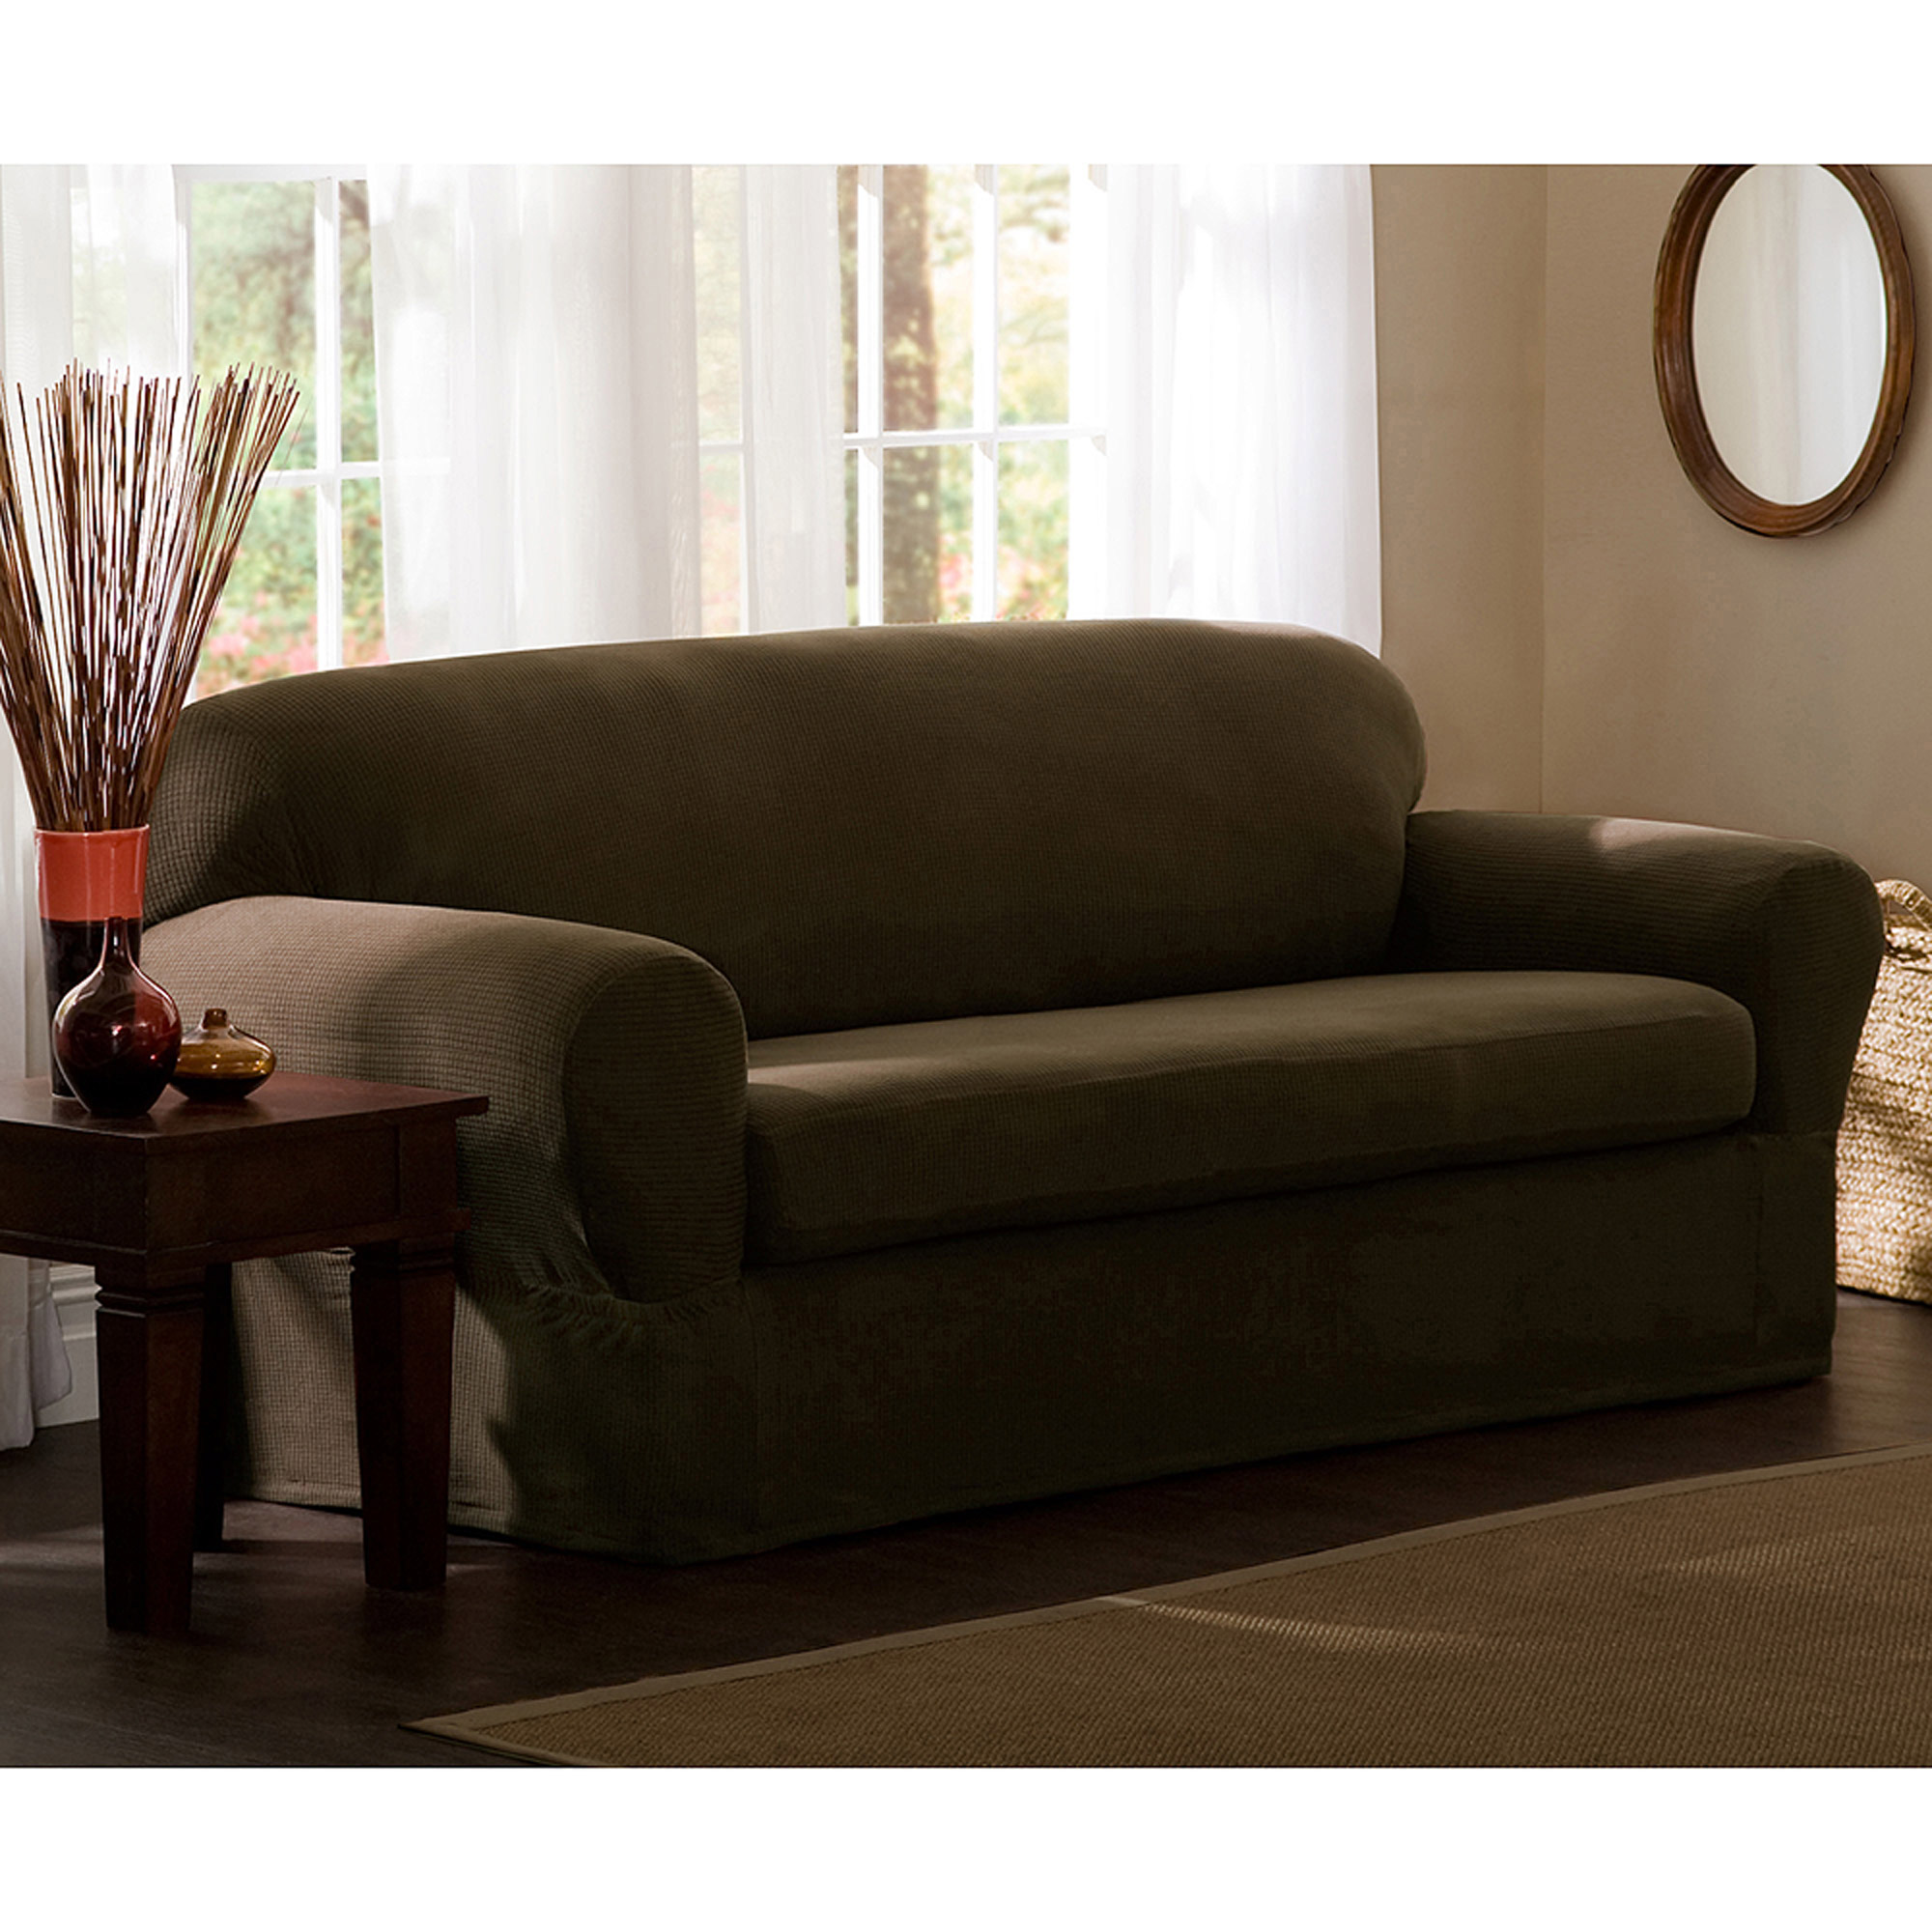 Maytex Stretch Reeves 2 Piece Loveseat Furniture Cover Slipcover -  Traveller Location